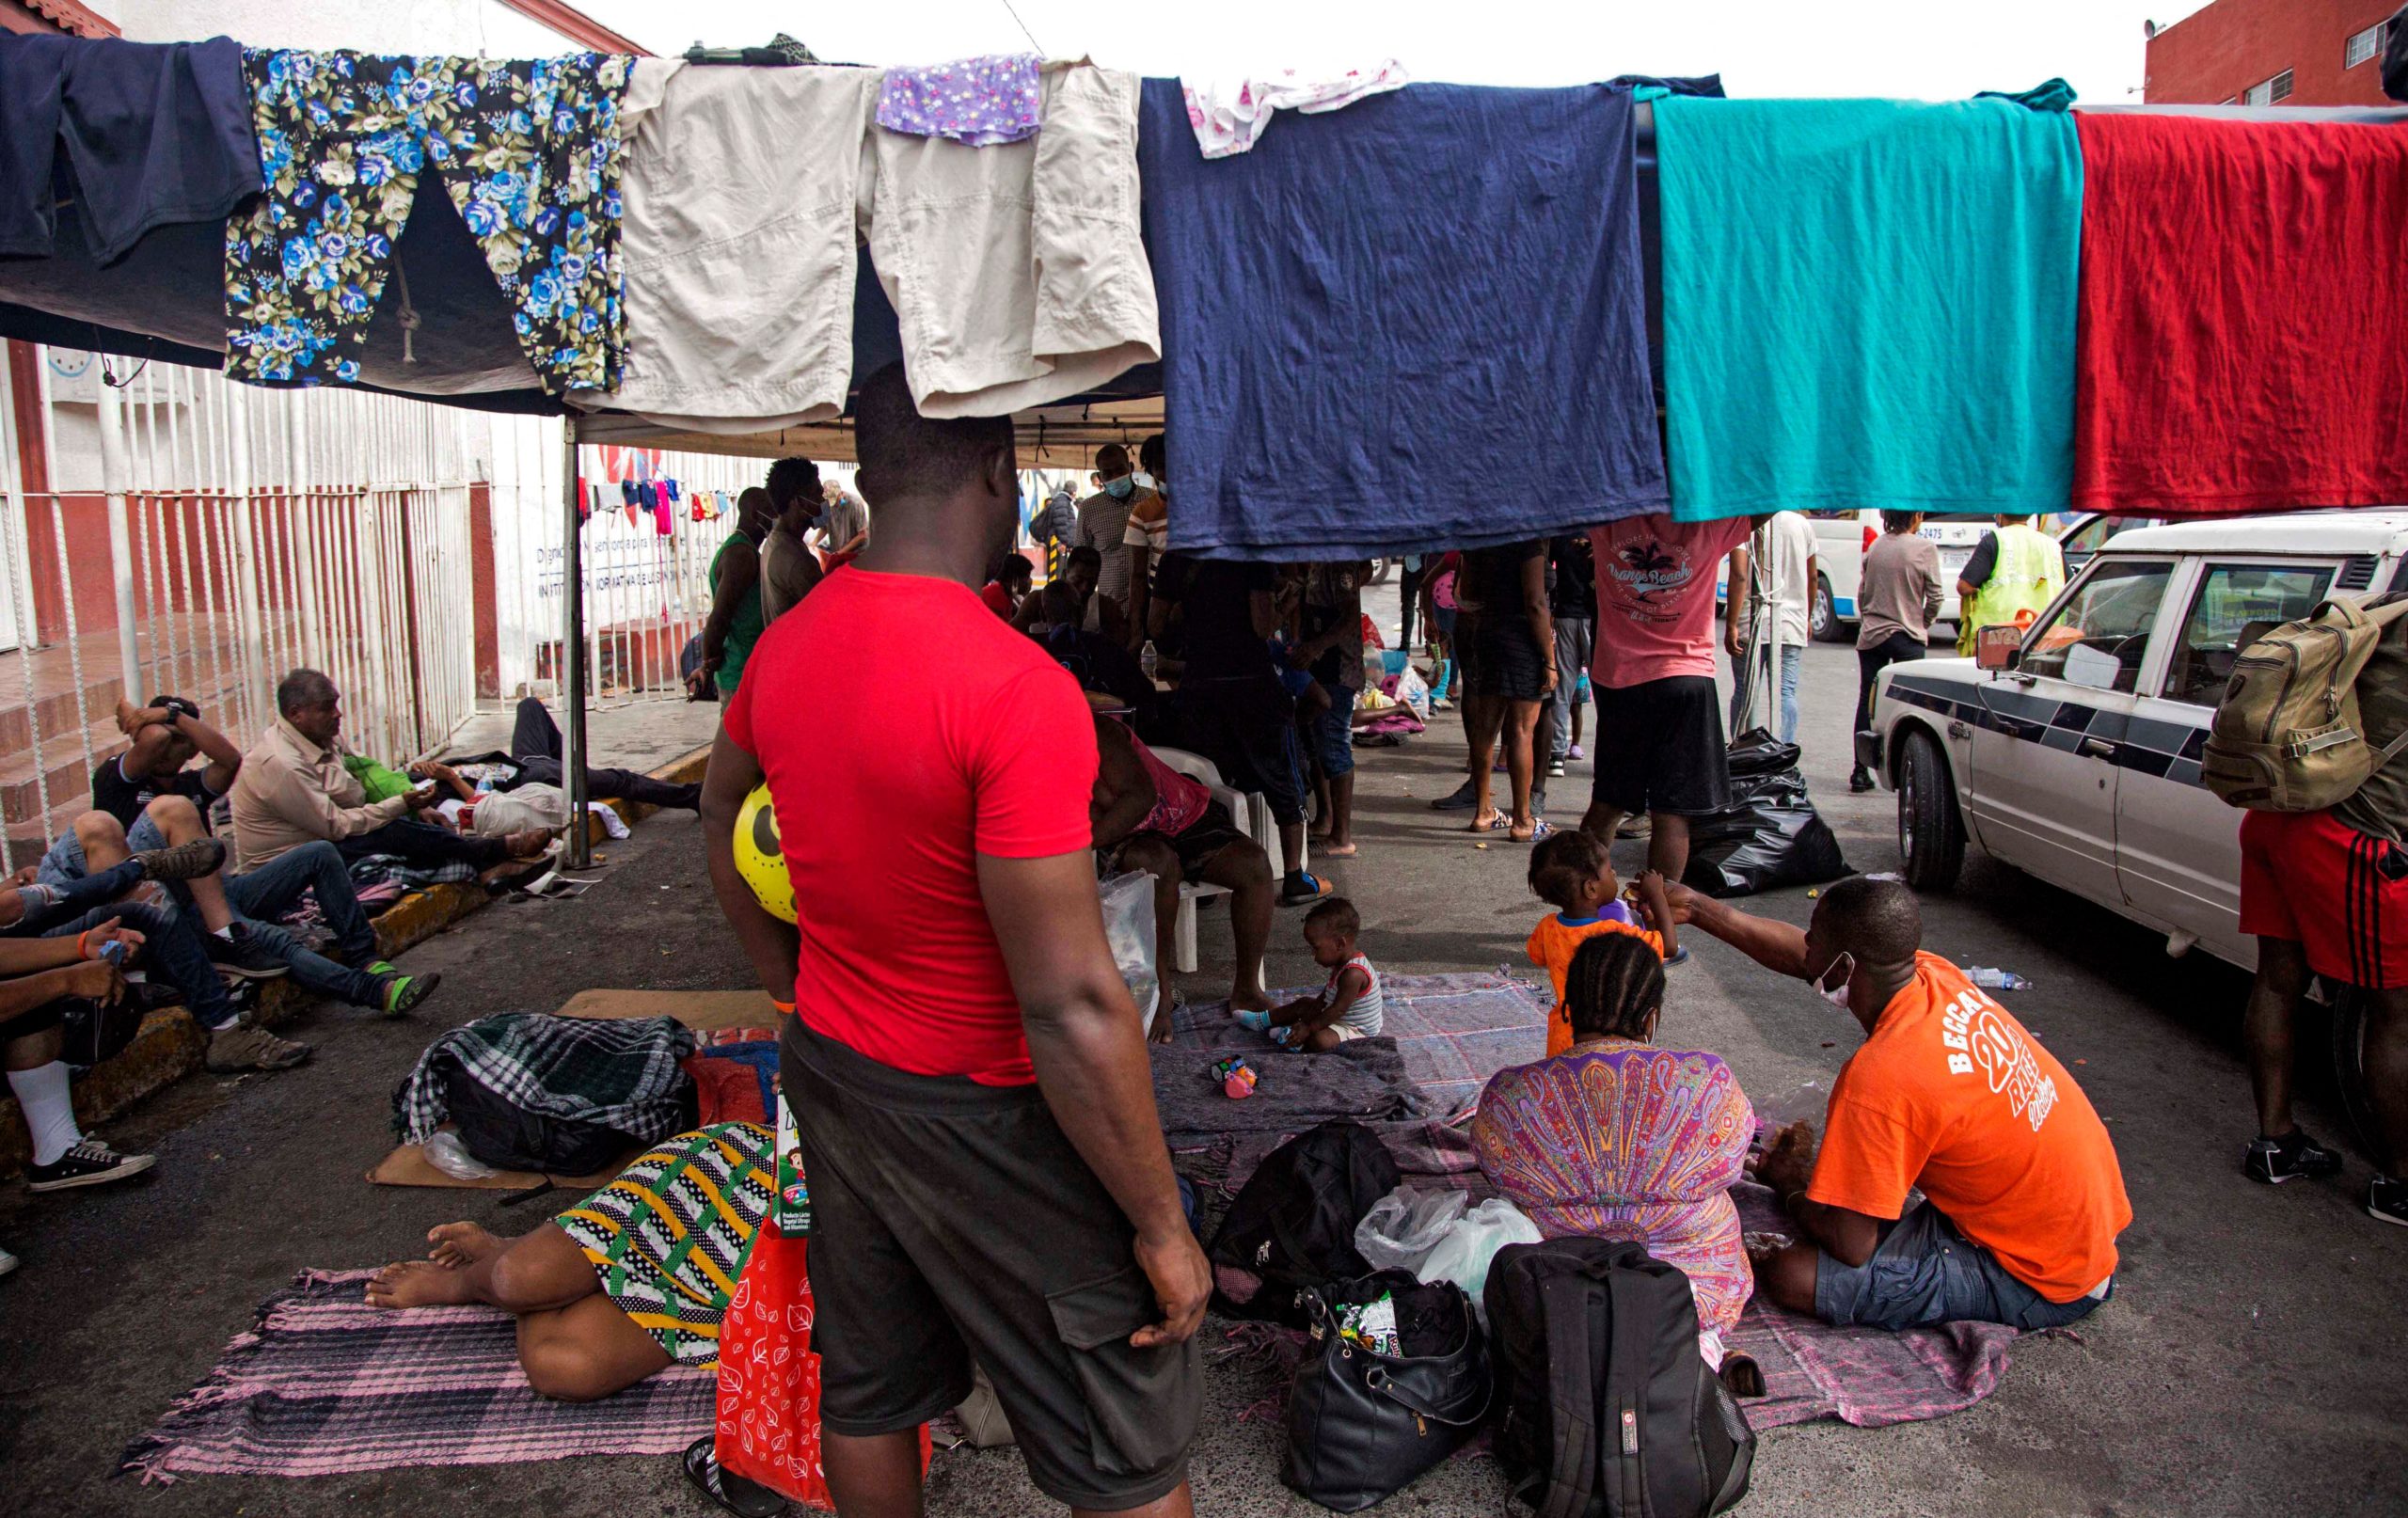 Haitian migrants remain outside a migrant shelter awaiting their immigration resolution, in Monterrey, Mexico, on September 26, 2021. (Photo by JULIO CESAR AGUILAR/AFP via Getty Images)